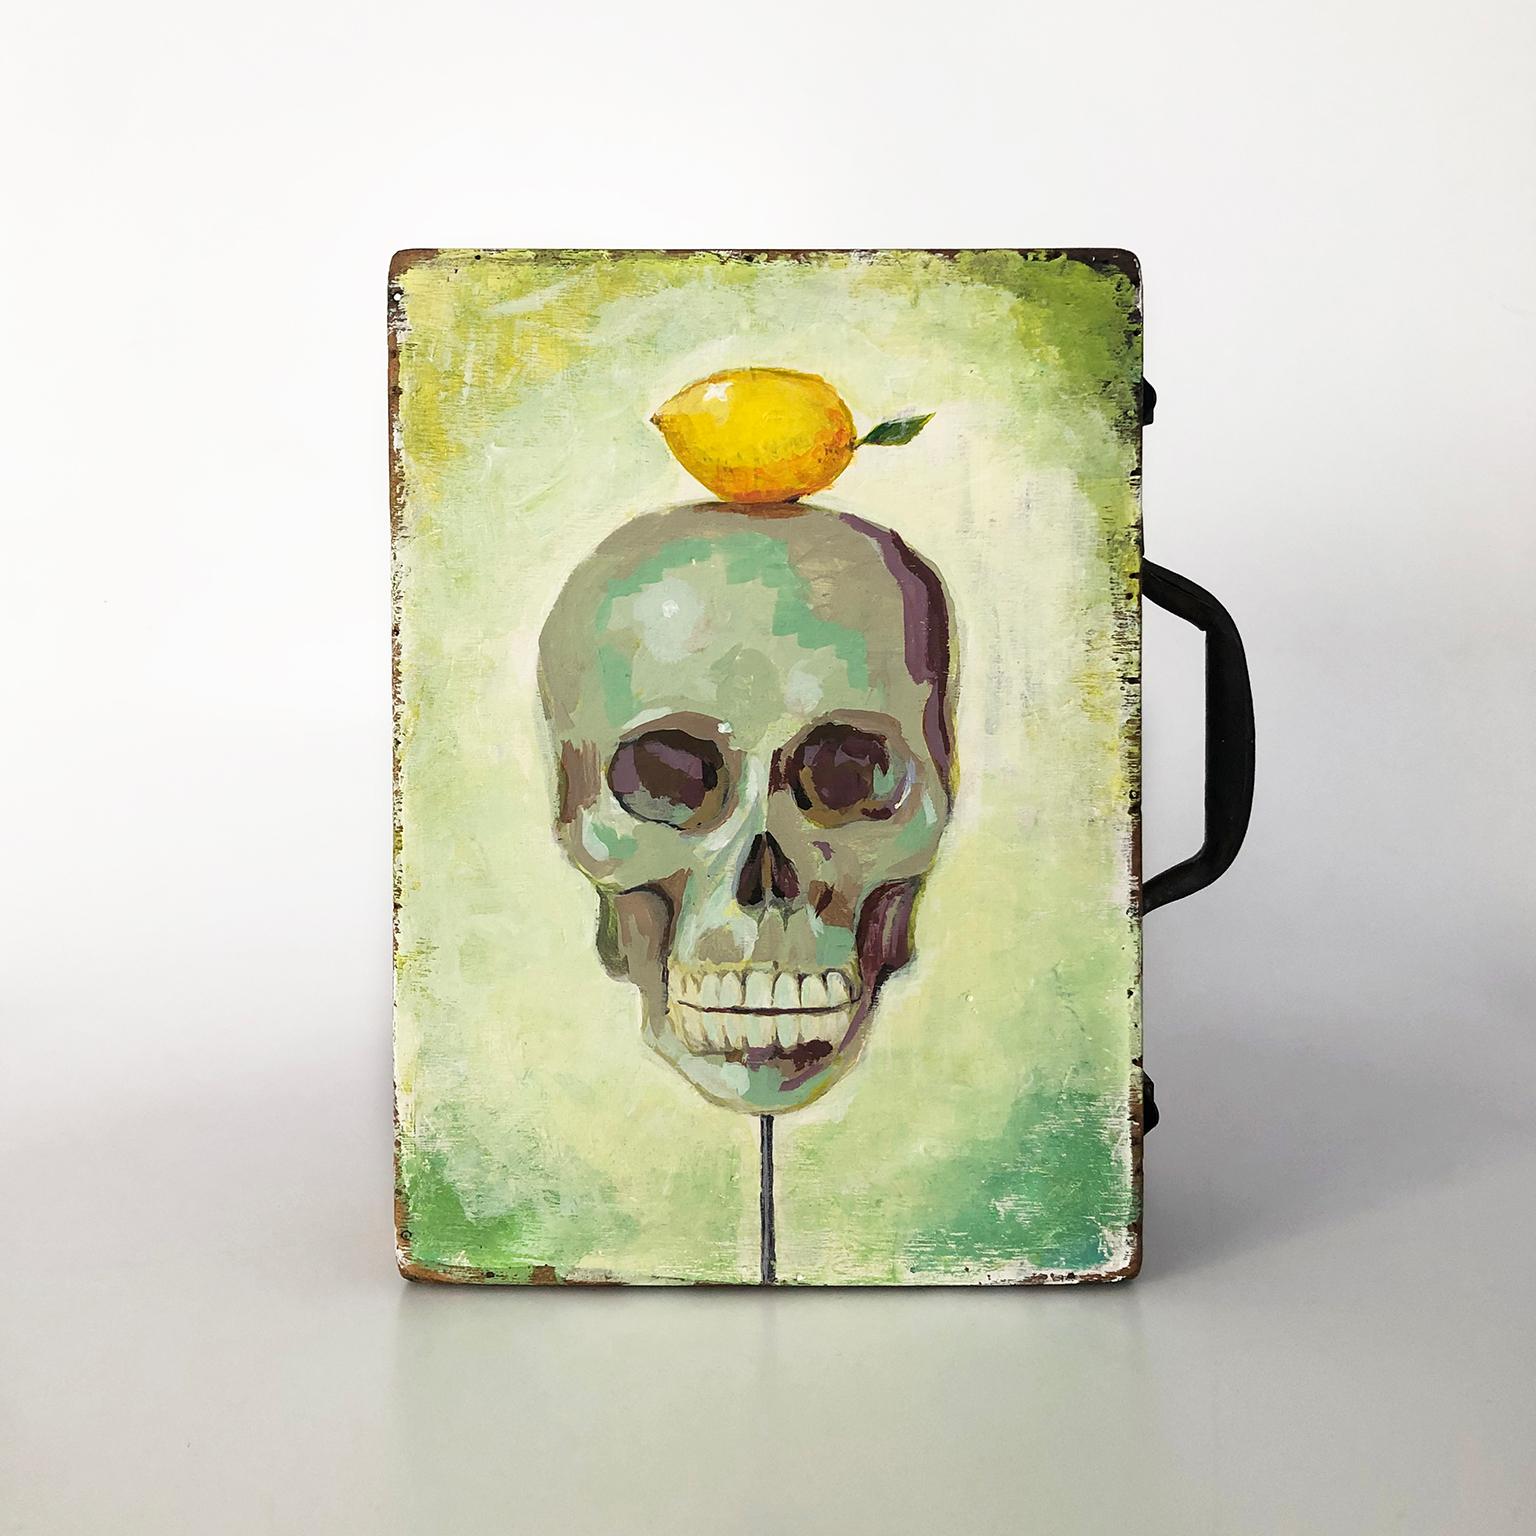 We offer this rare antique artist box with skull with lemon painting, circa 1940.